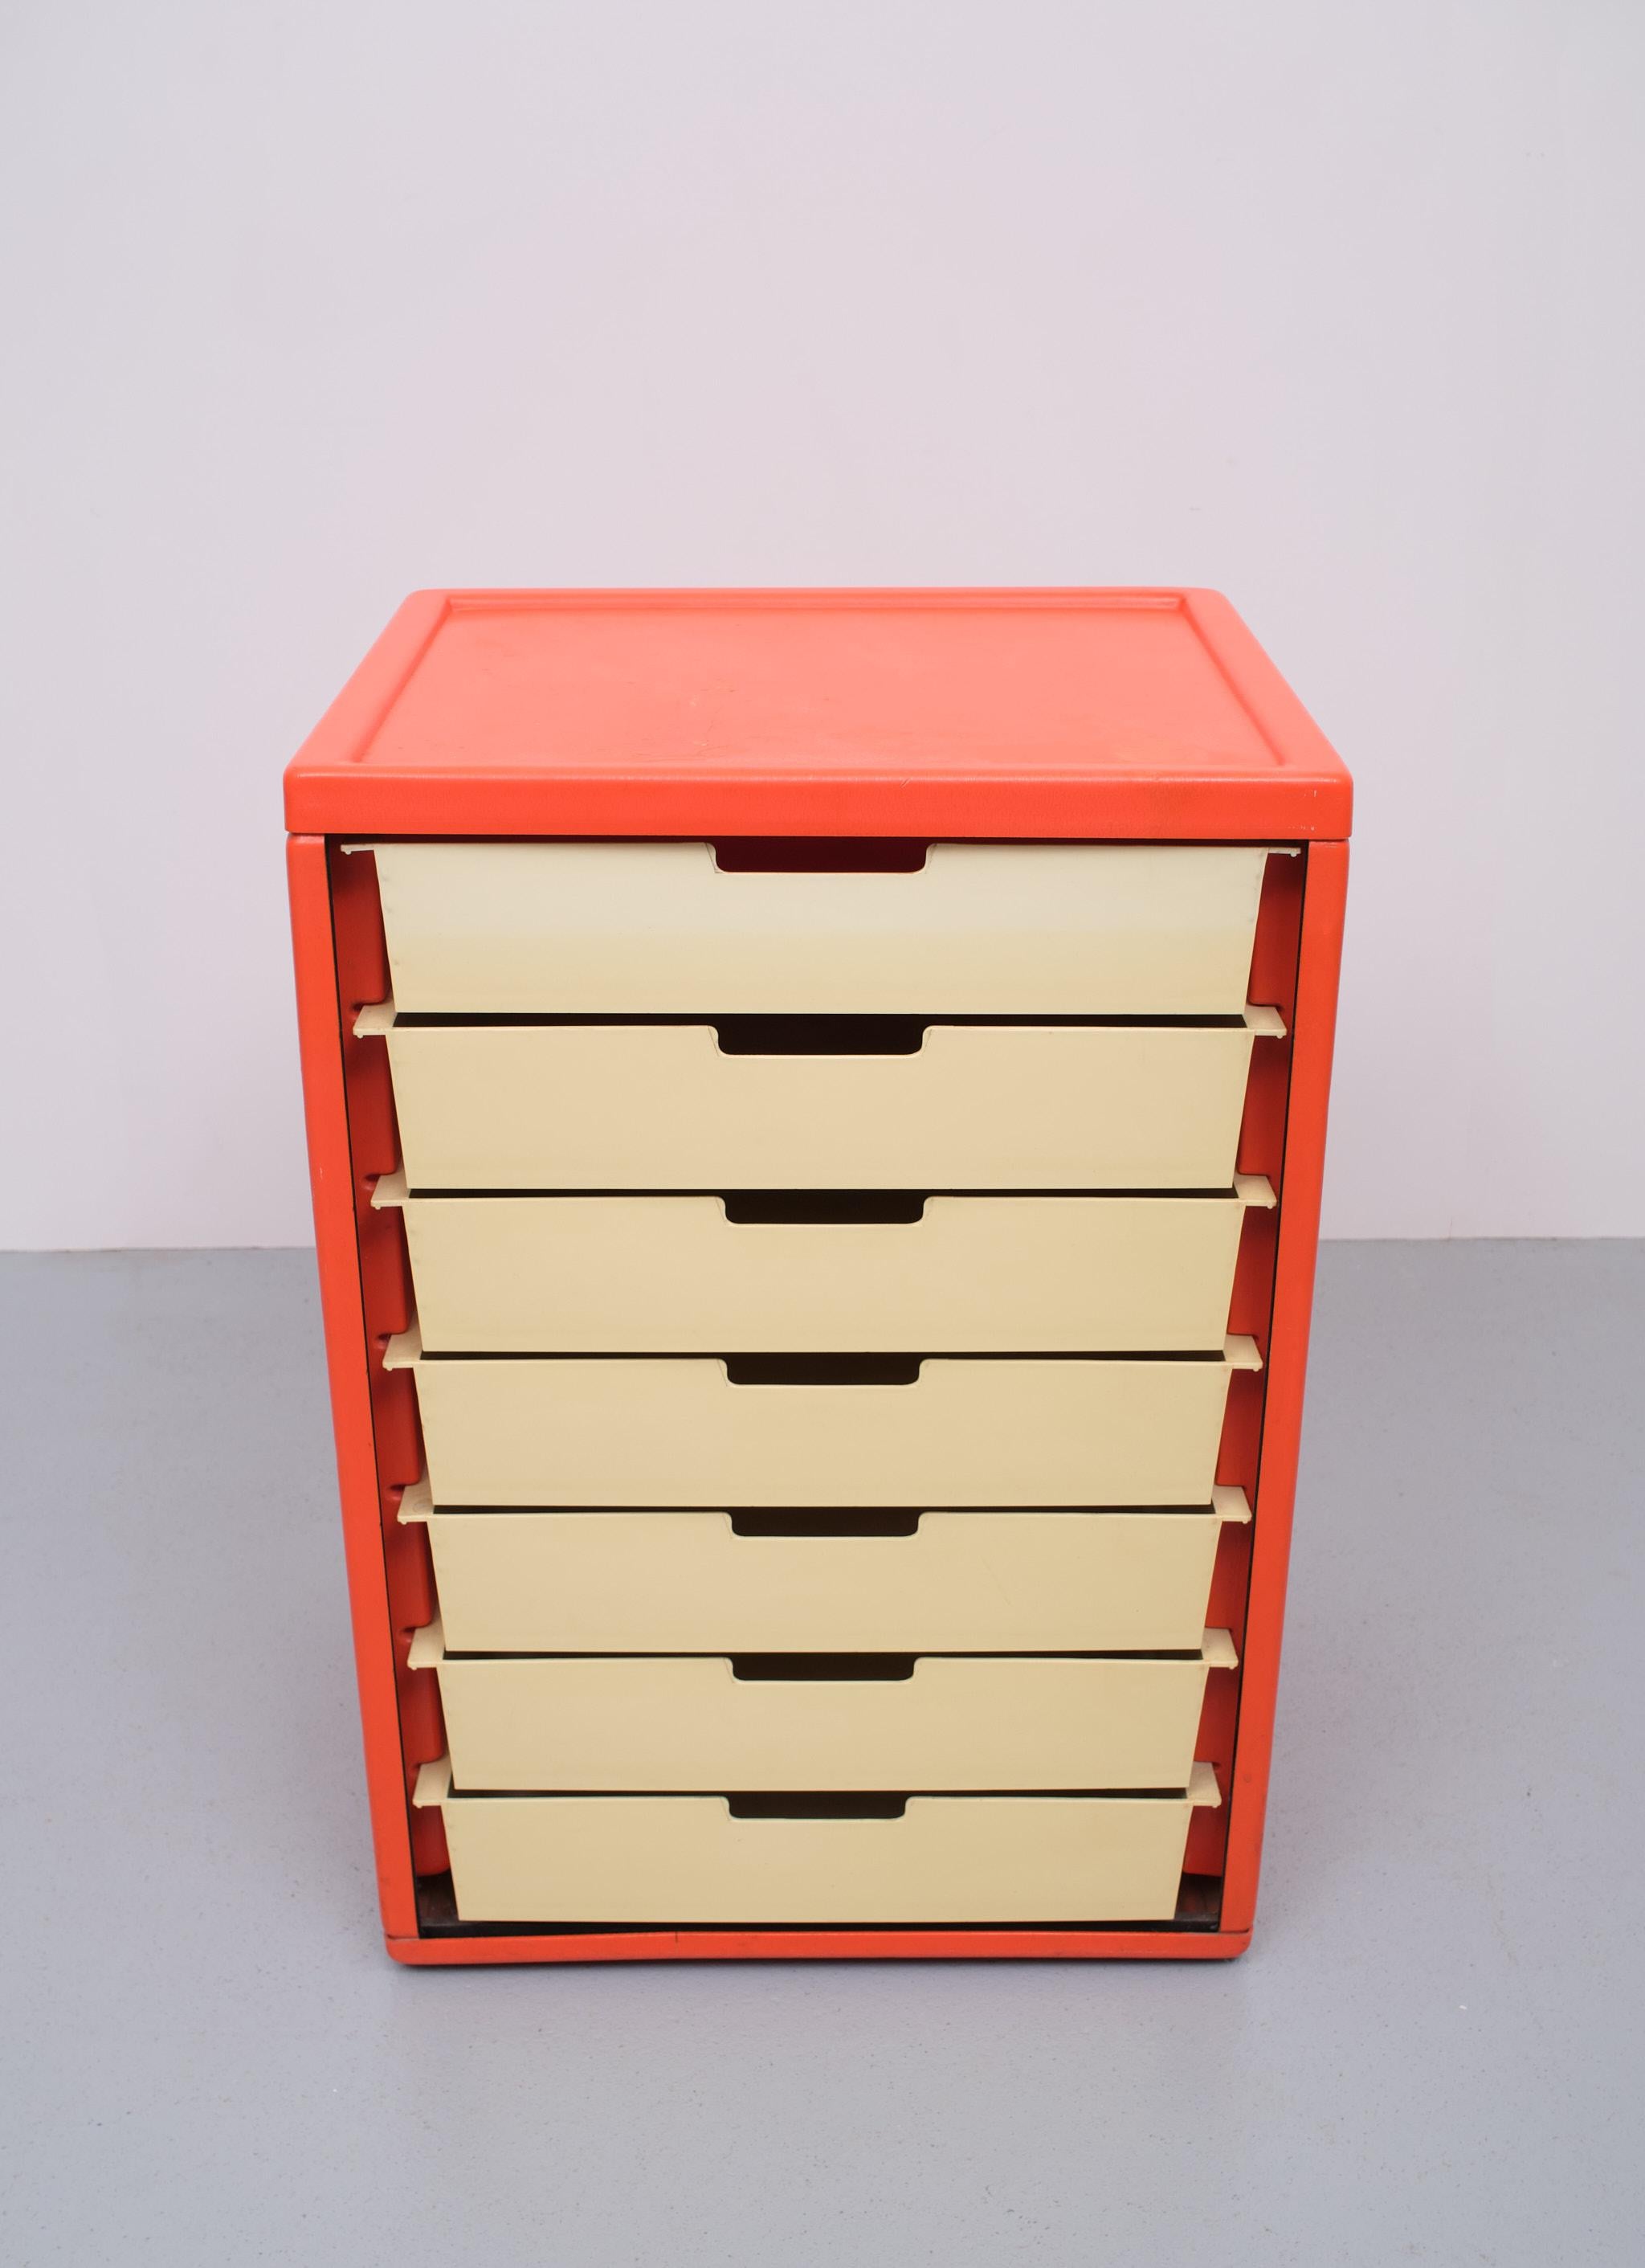 Very nice commode or chest of drawers Model ''Tyros '' Manufactured by Meurop Belgie 1969 Space Ace style.
Design Pieter de Bruijn. Bright Orange Base ,with 7 drawers.
On the top users marks.
 